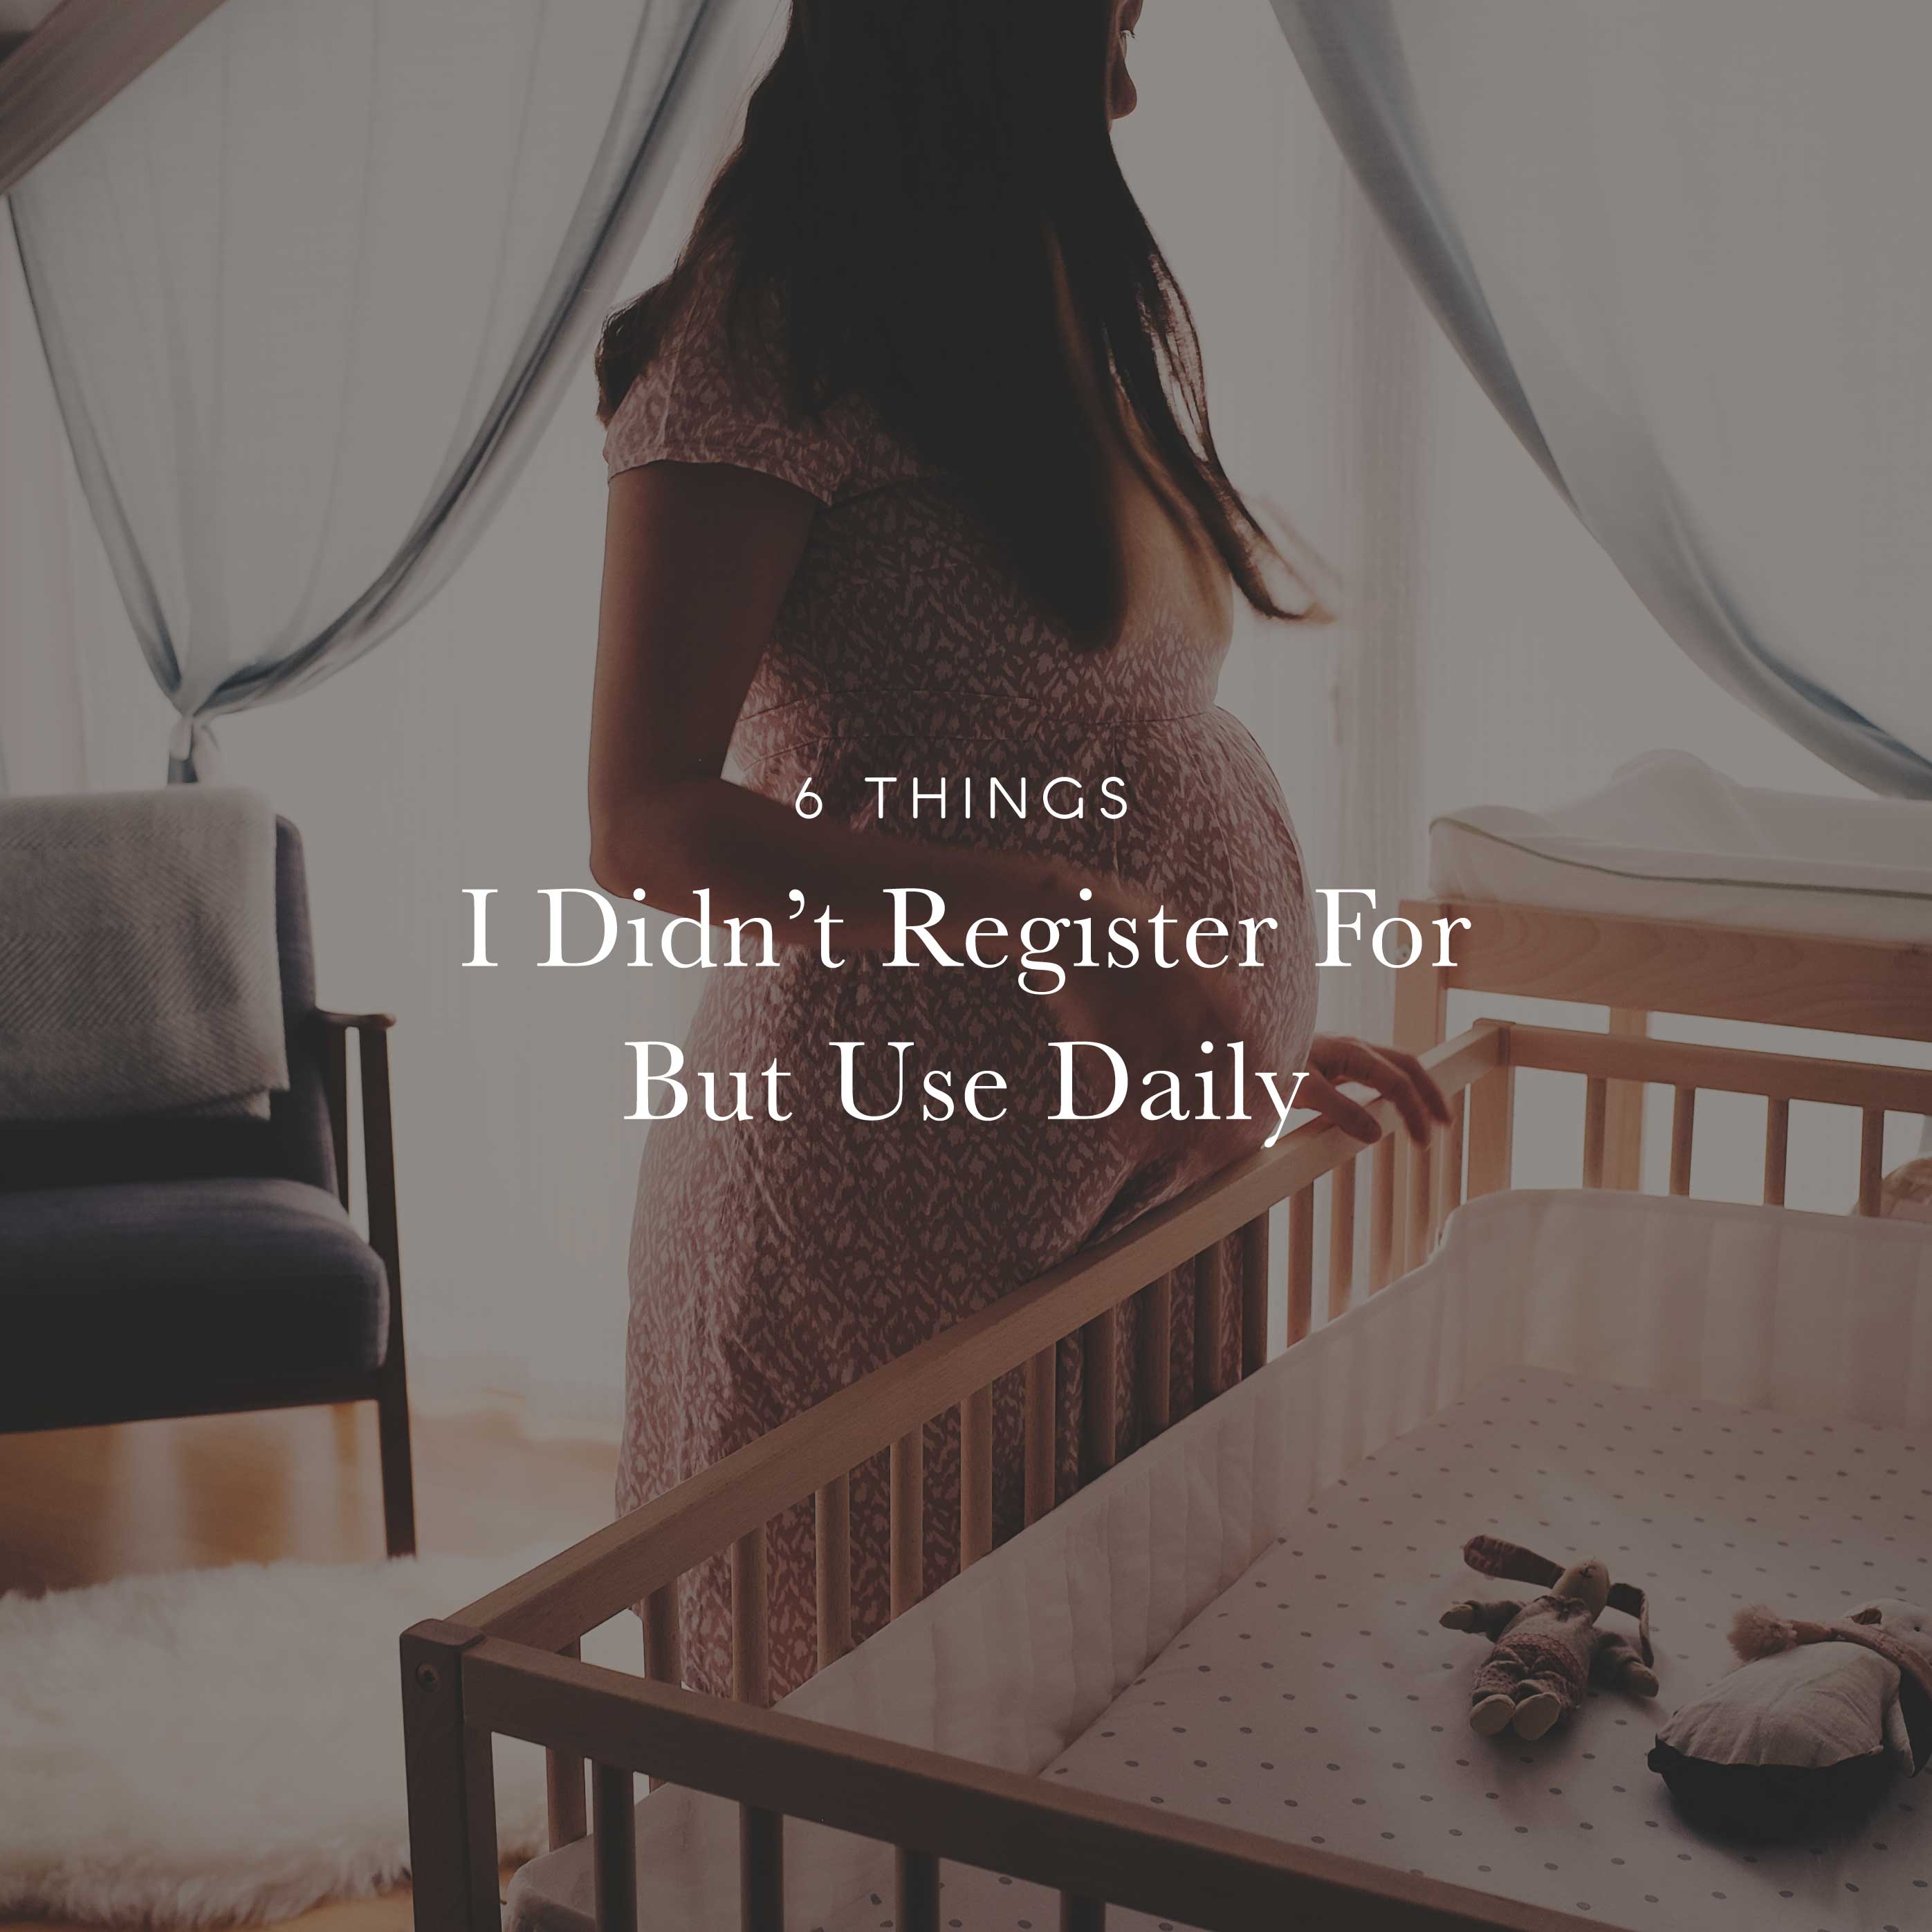 6 Things I Didn’t Register For But Use Daily